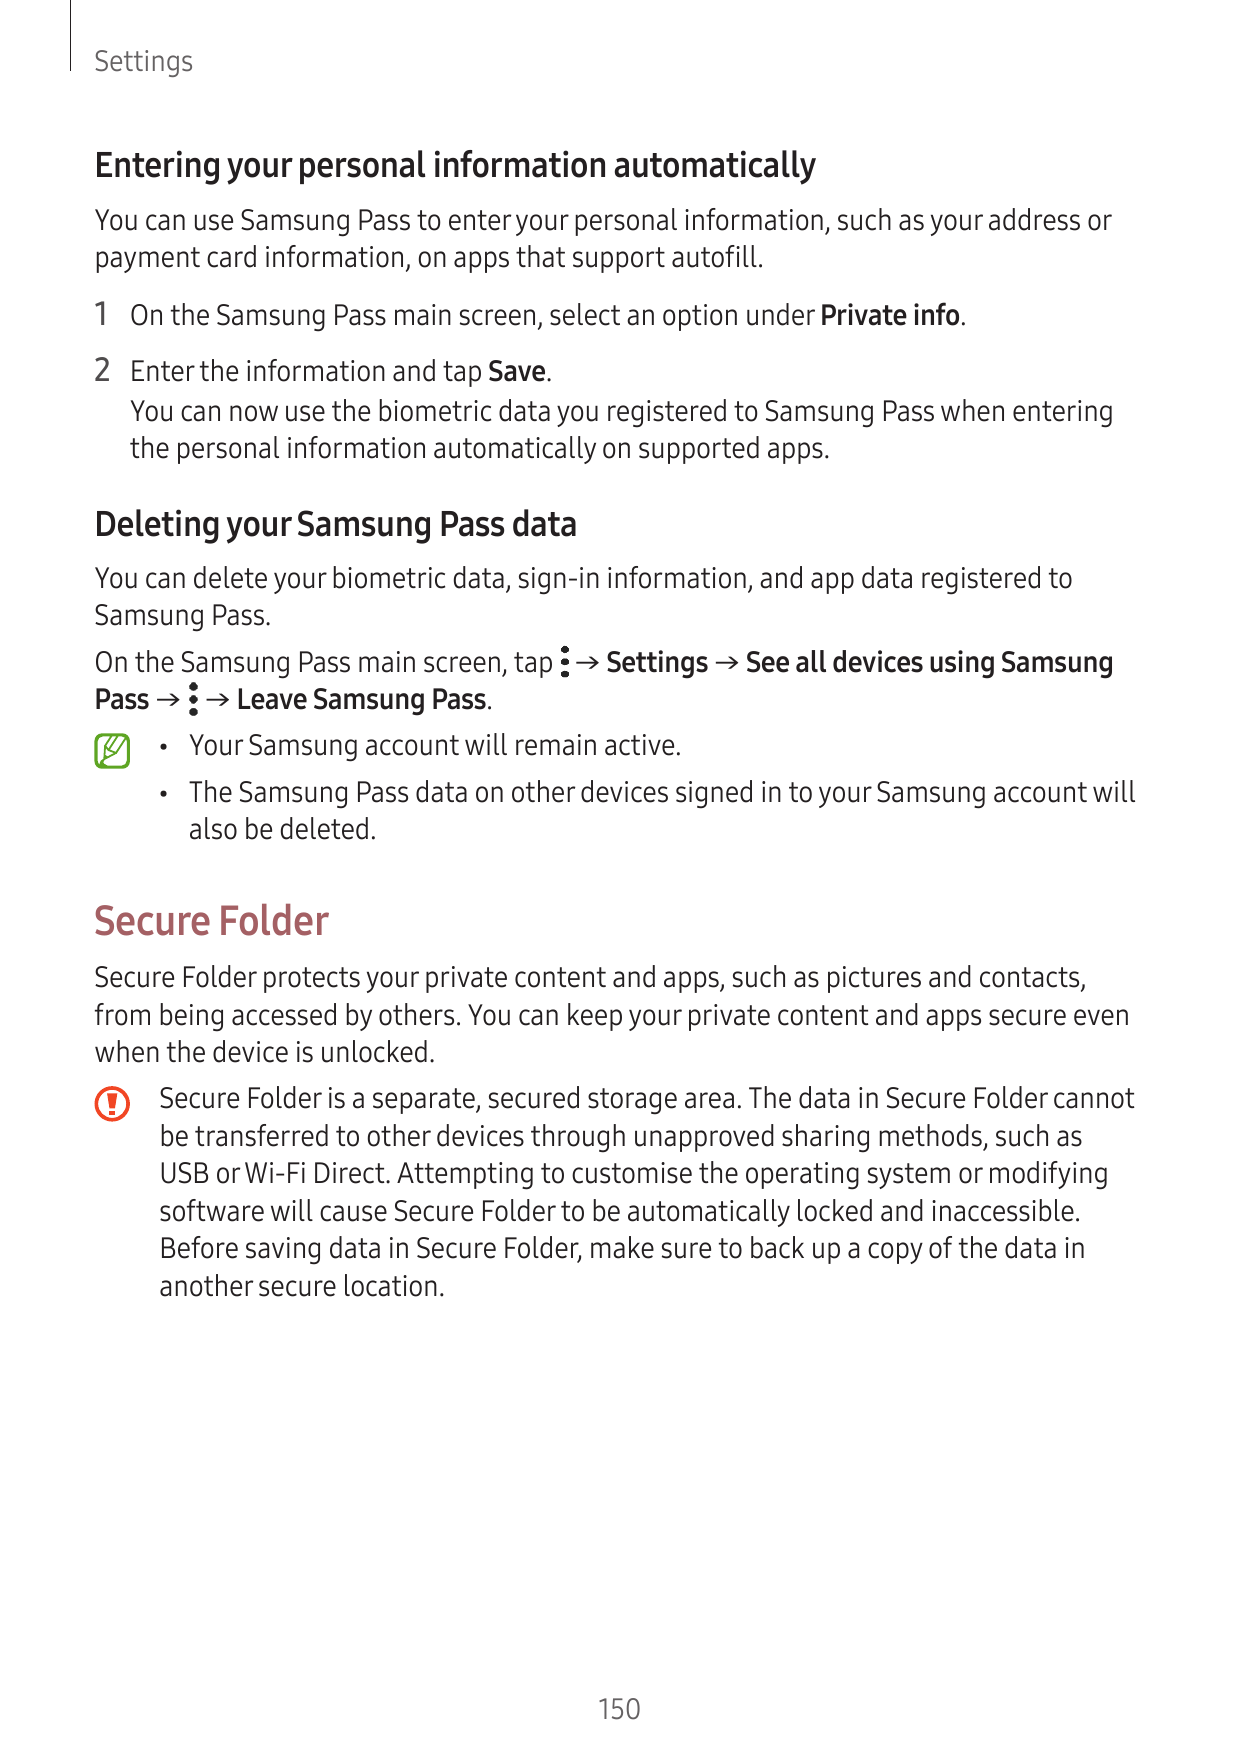 SettingsEntering your personal information automaticallyYou can use Samsung Pass to enter your personal information, such as you